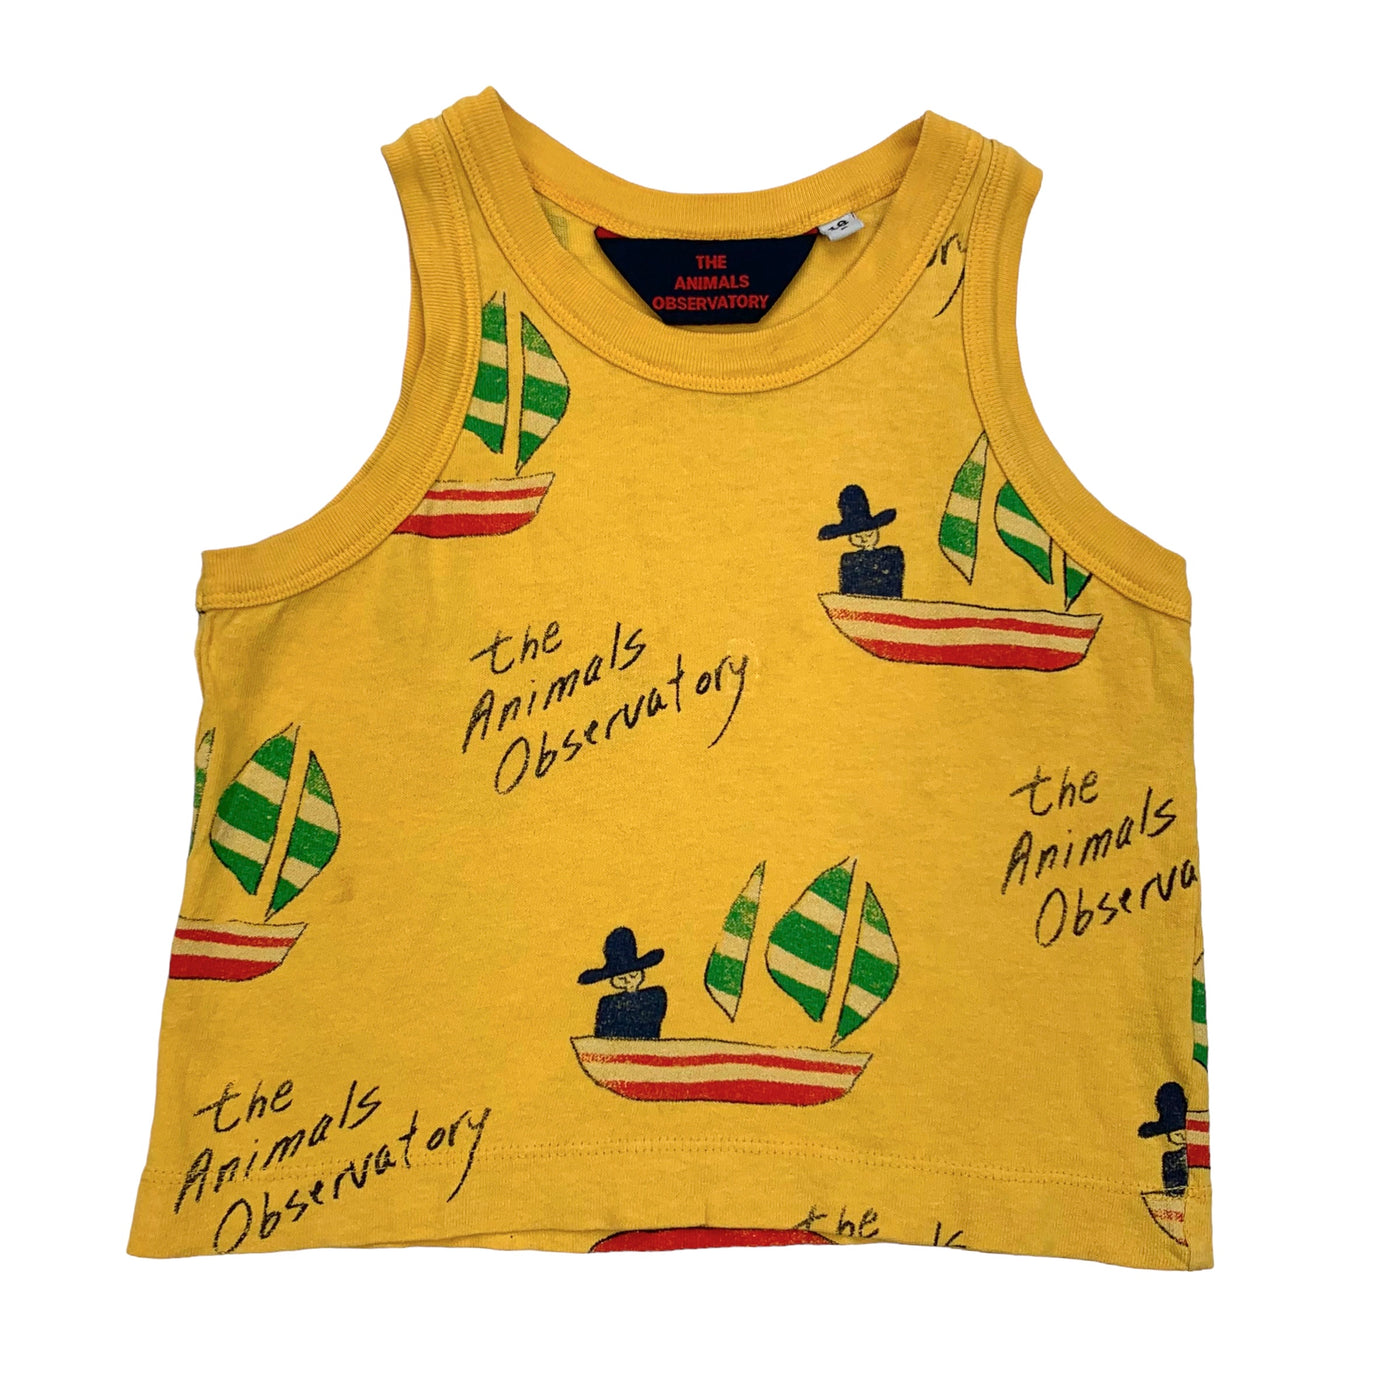 The animals observatory singlet yellow boat print size 18m